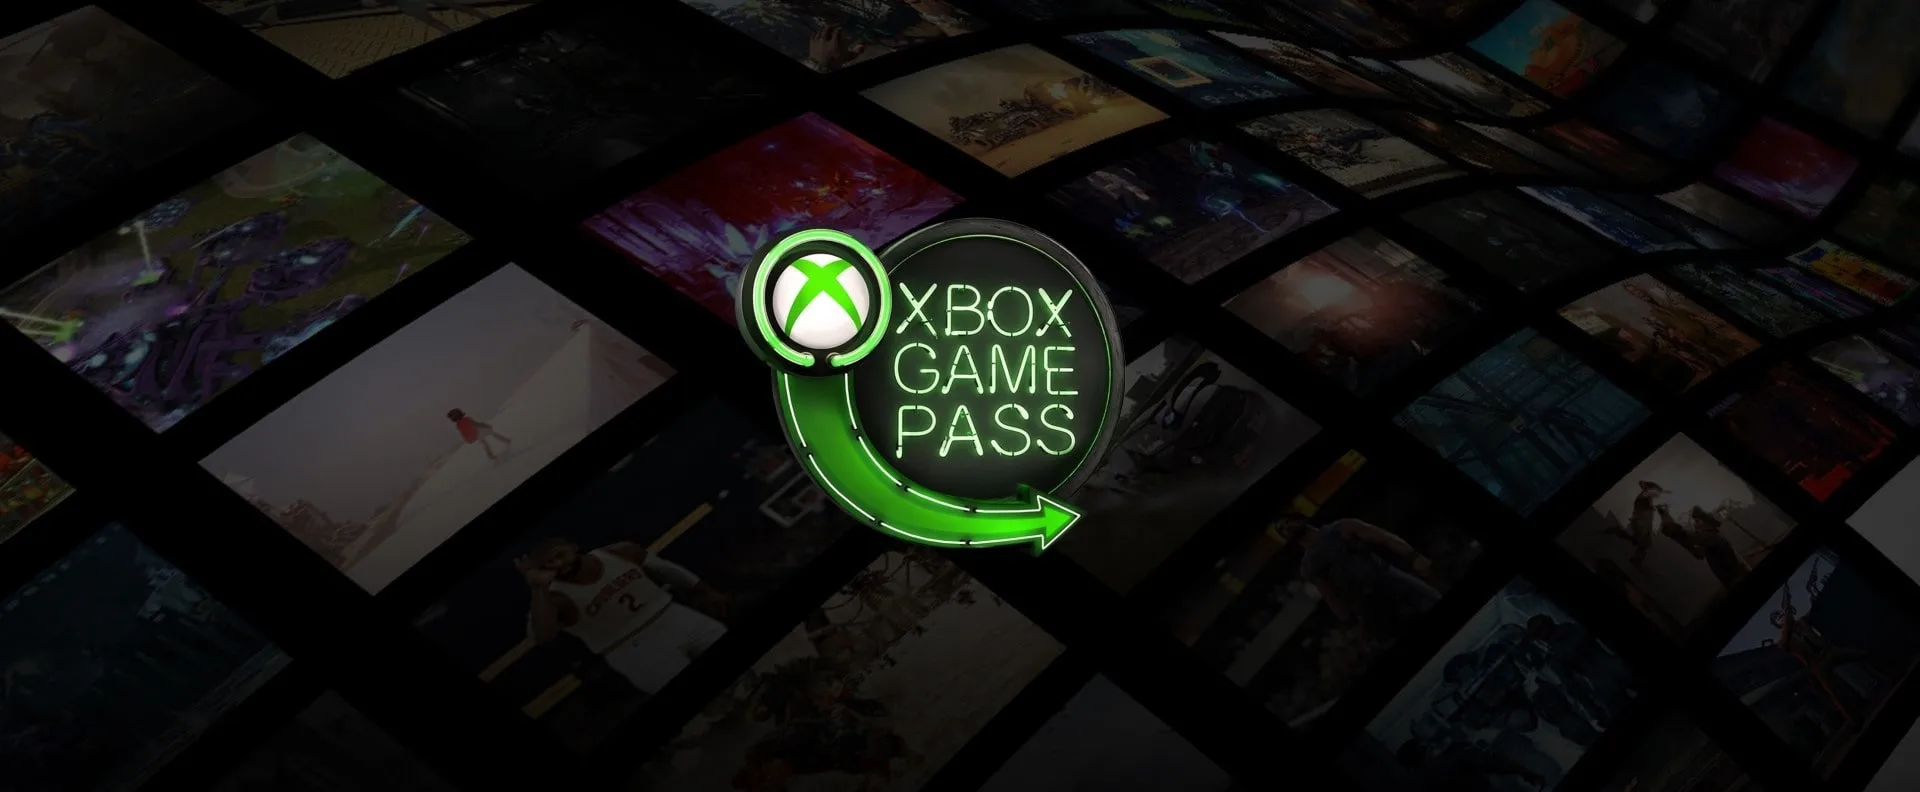 3 Games to be Removed from Xbox Game Pass